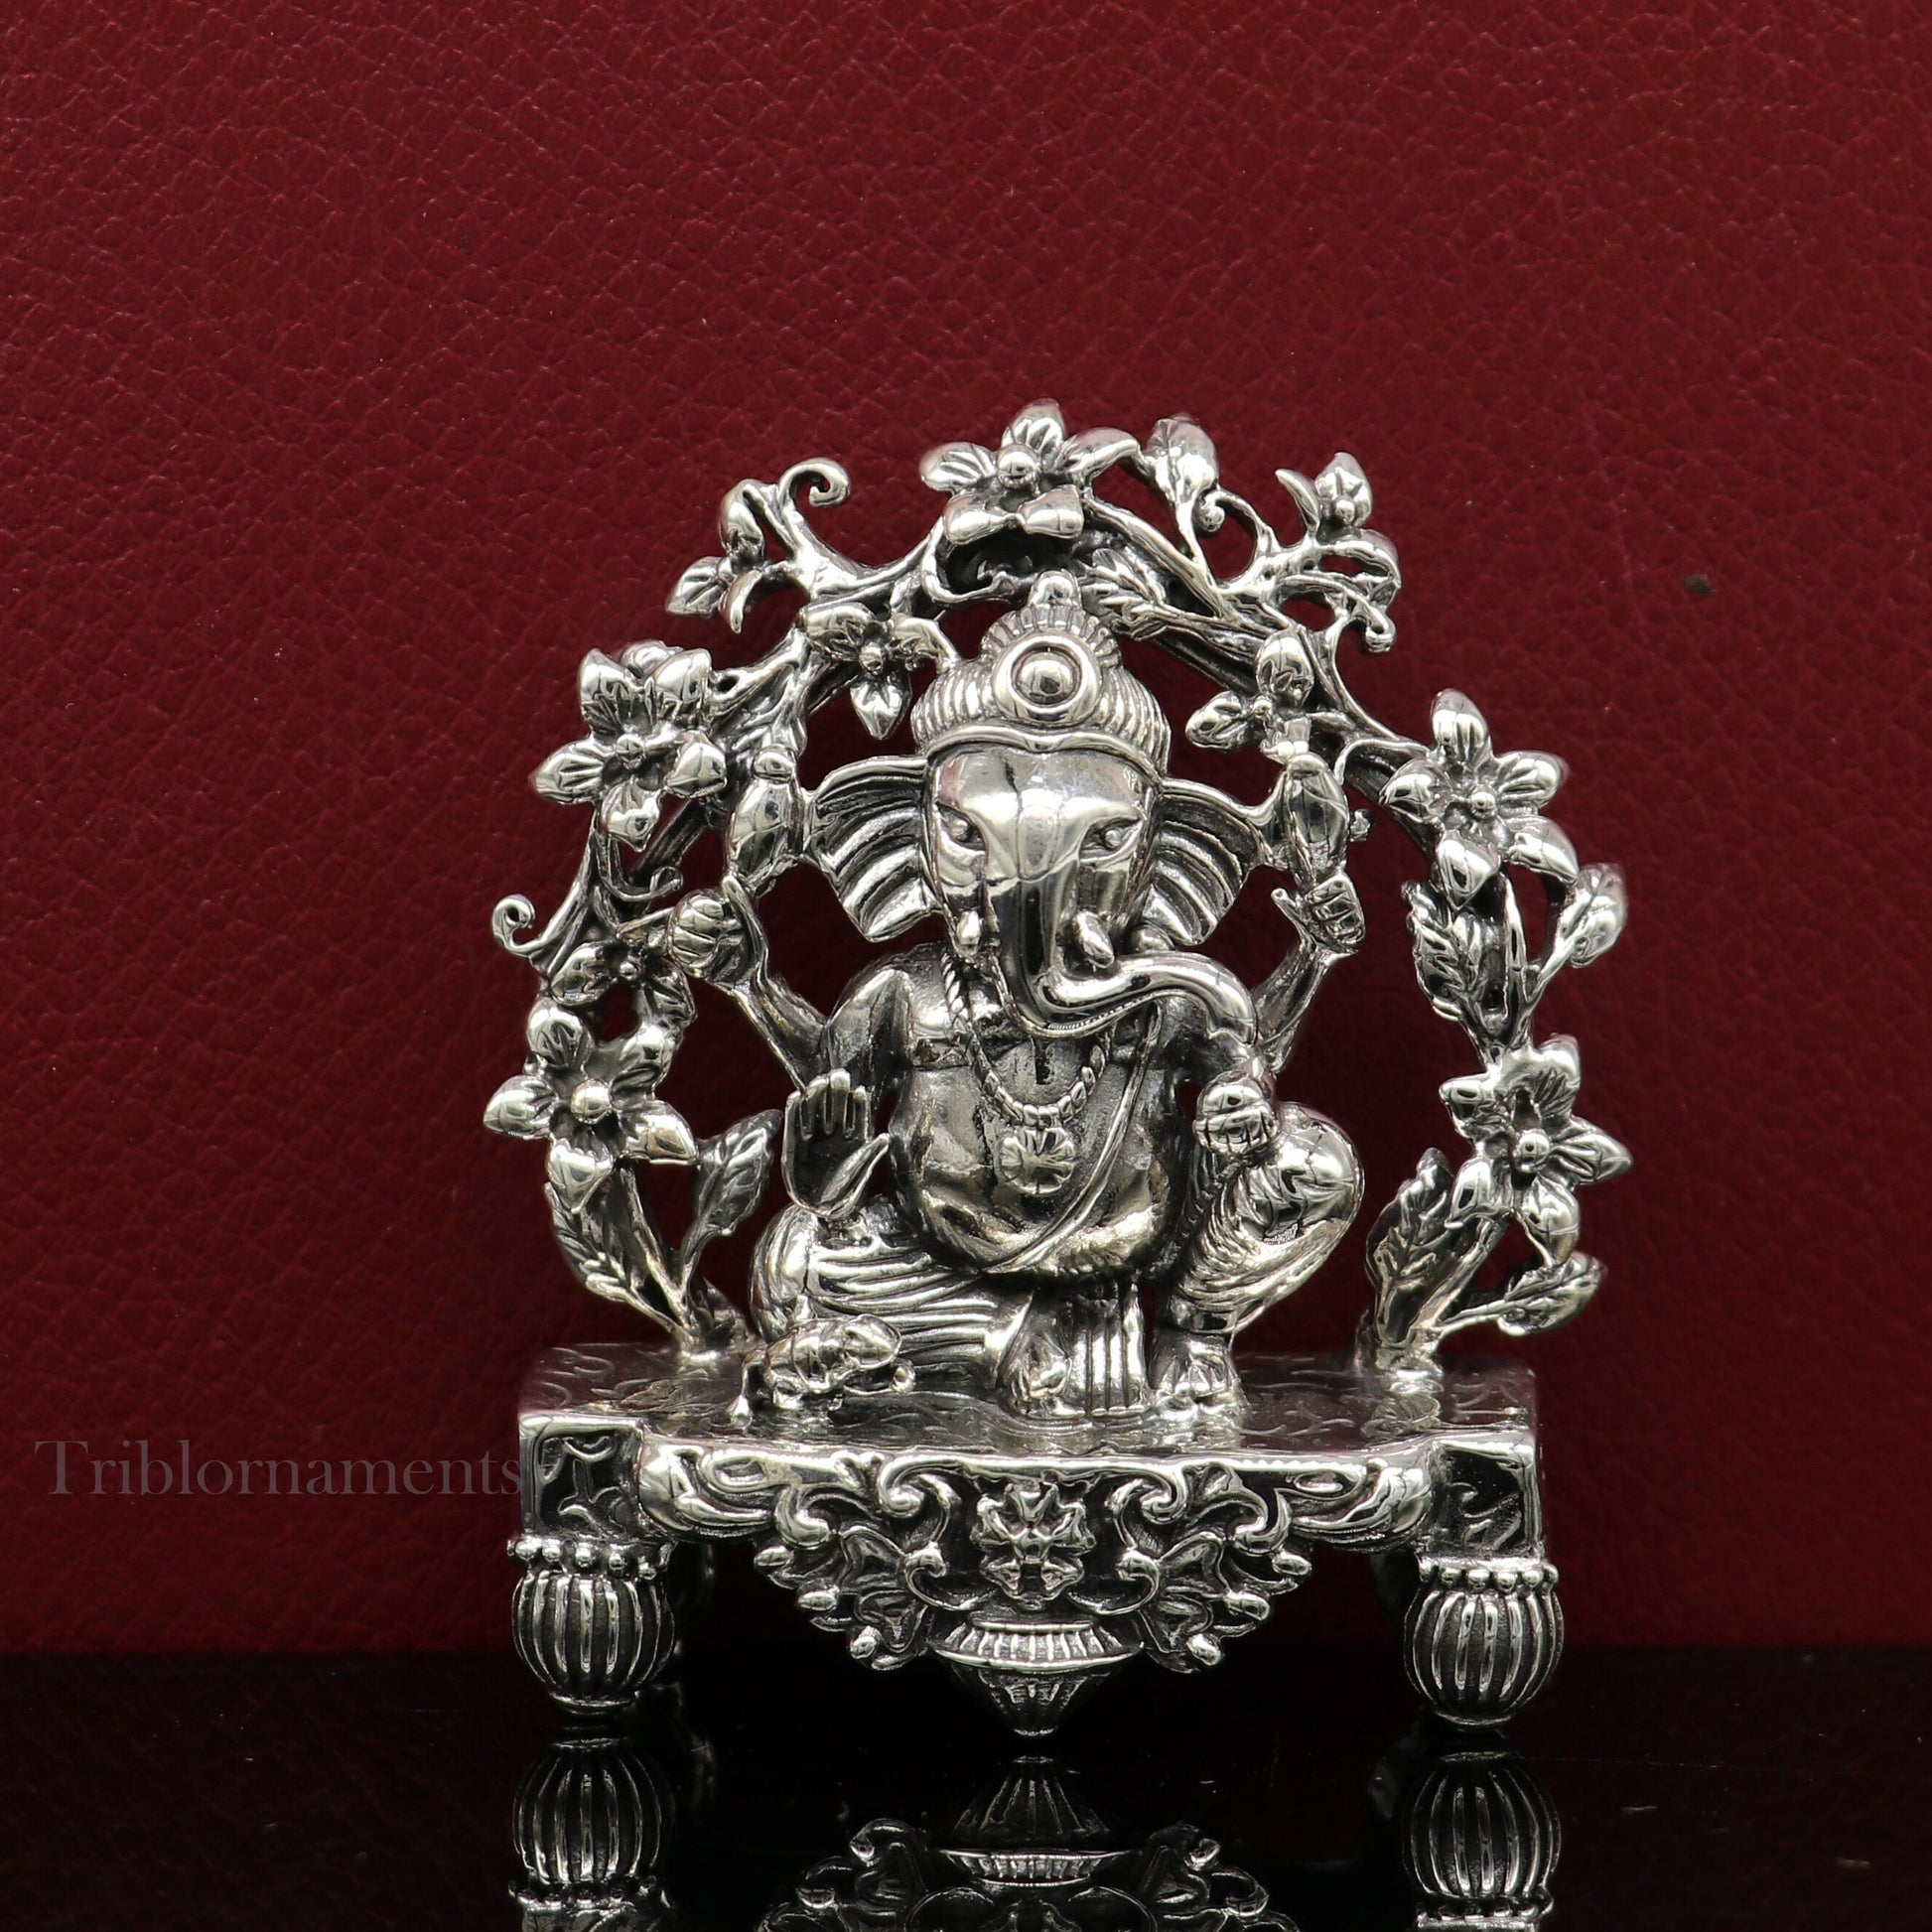 925 Sterling silver Lord Ganesh Idol, Pooja Articles, Indian Silver Idols, handcrafted Lord Ganesh statue sculpture amazing gifting art175 - TRIBAL ORNAMENTS